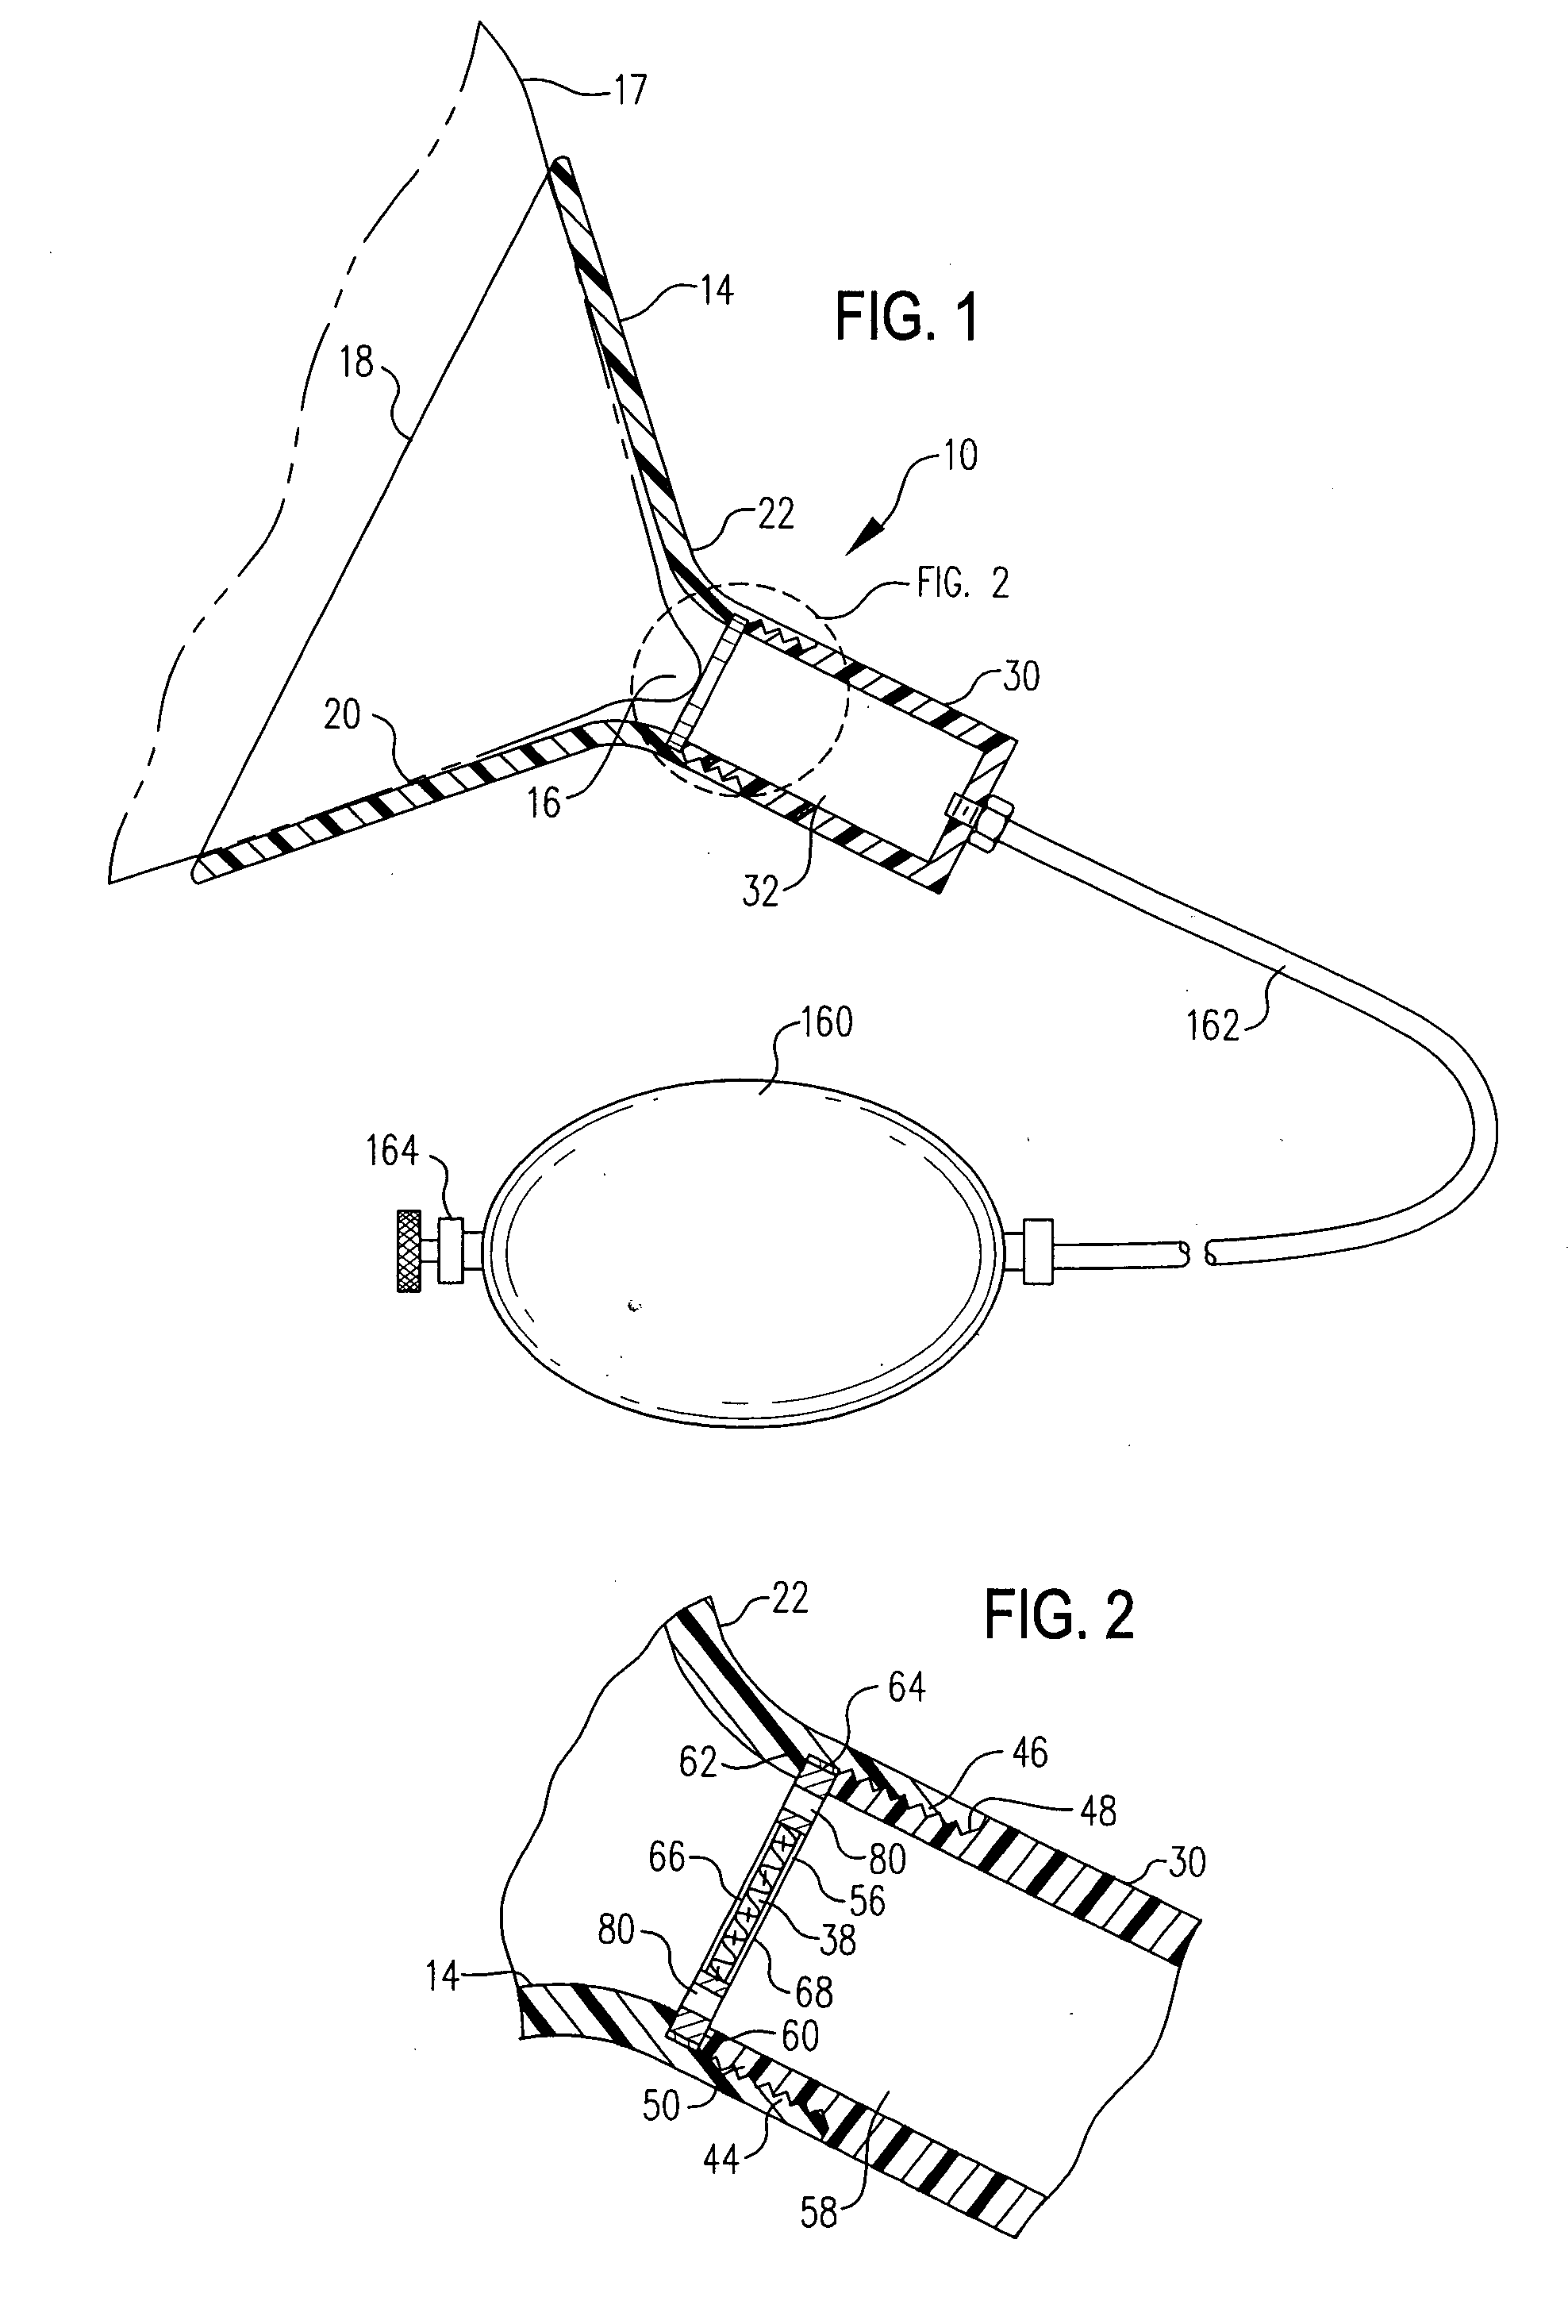 Devices and methods for obtaining mammary fluid samples for evaluating breast diseases, including cancer